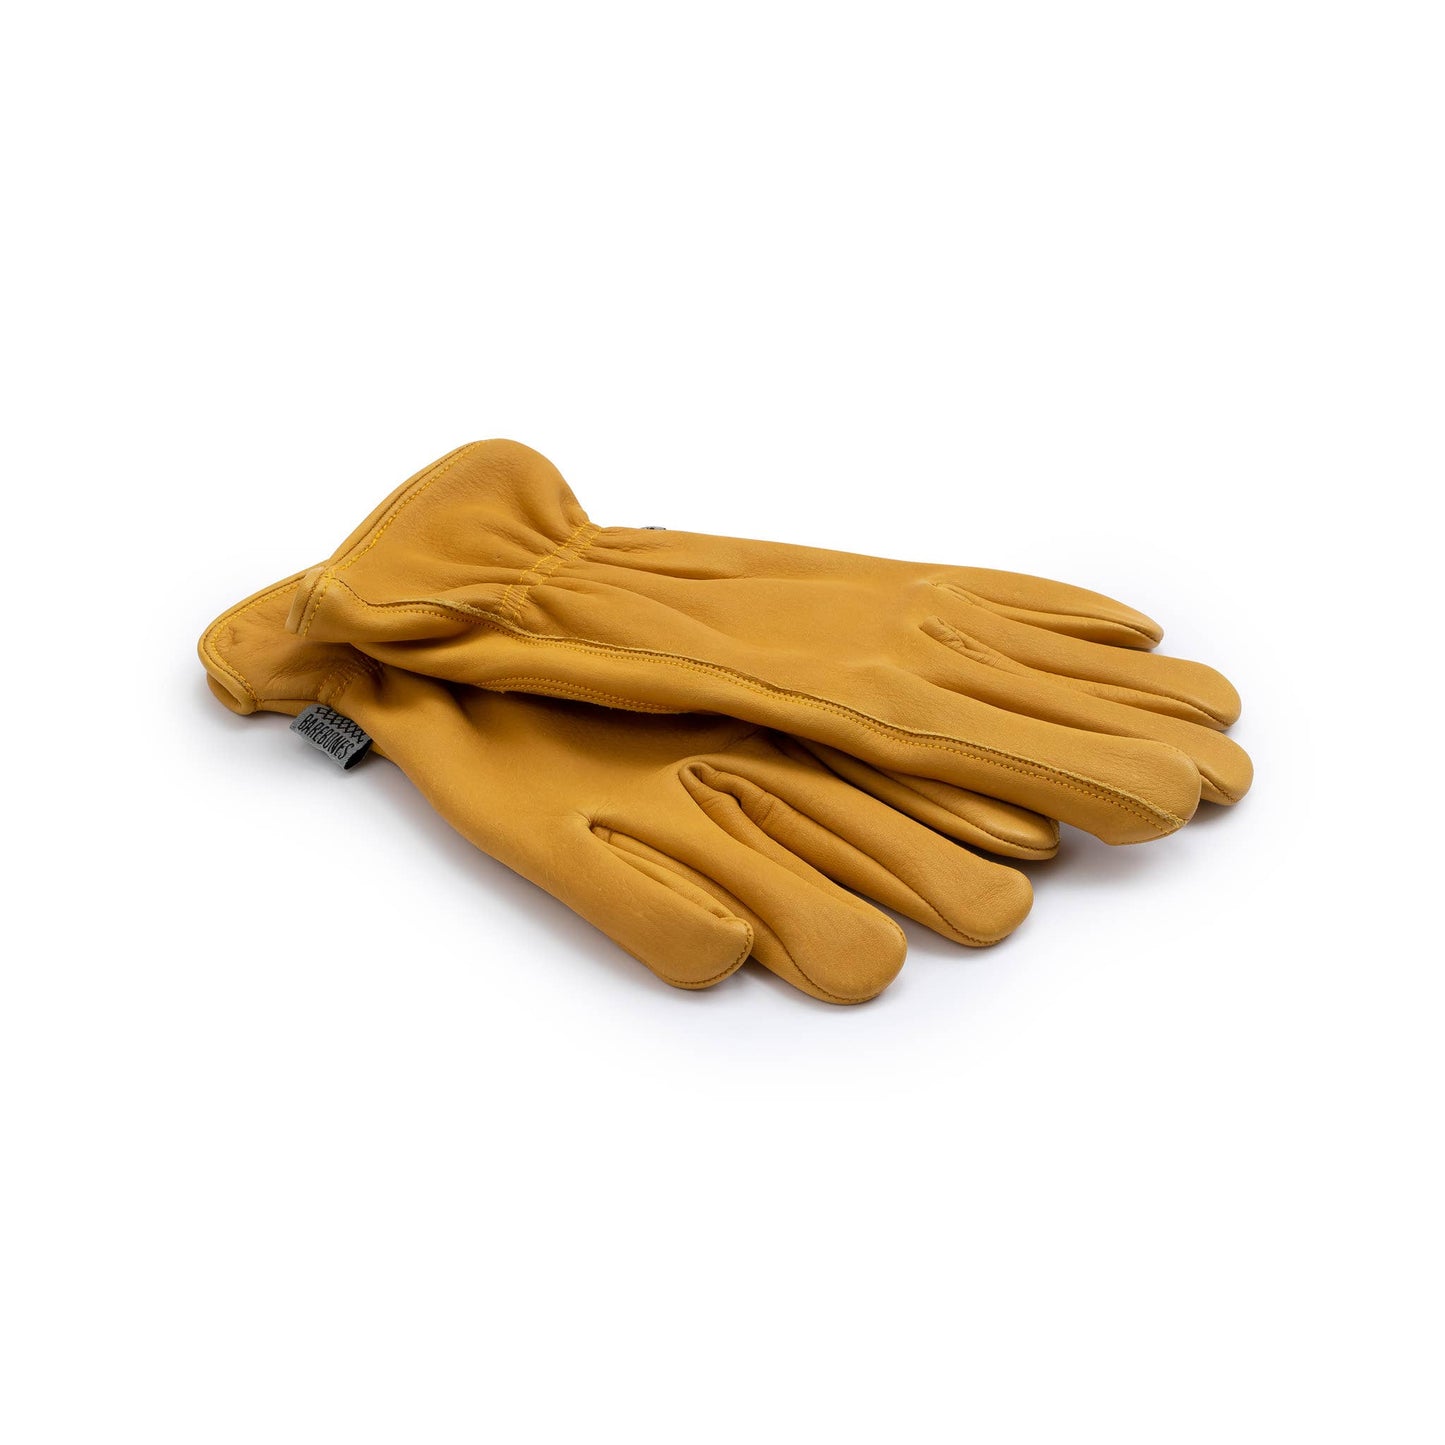 Classic Work Gloves: L/XL / Natural Yellow